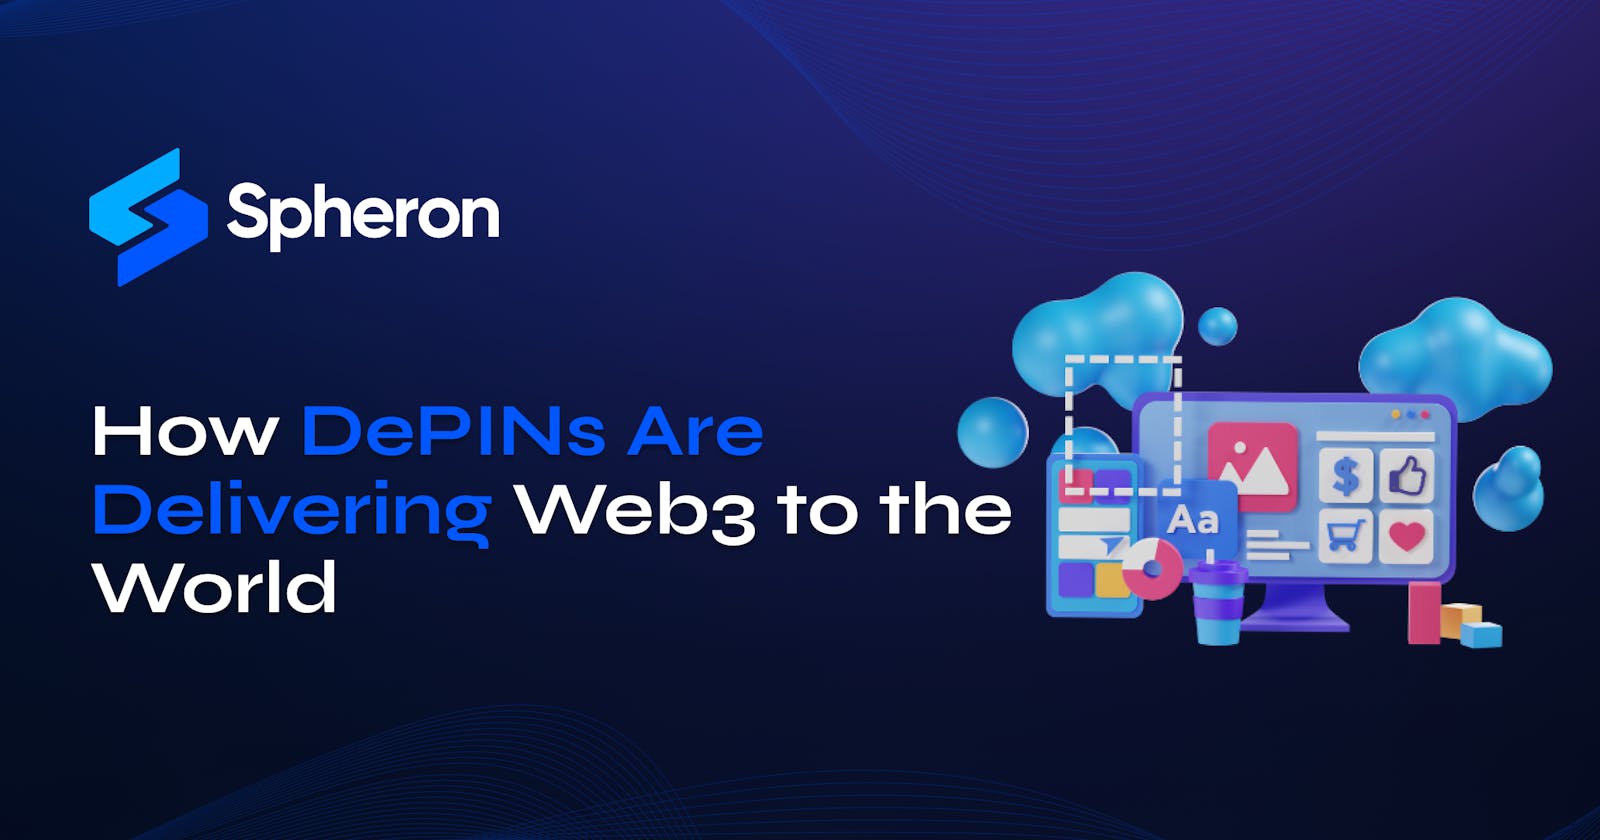 How DePINs Are Delivering Web3 to the World